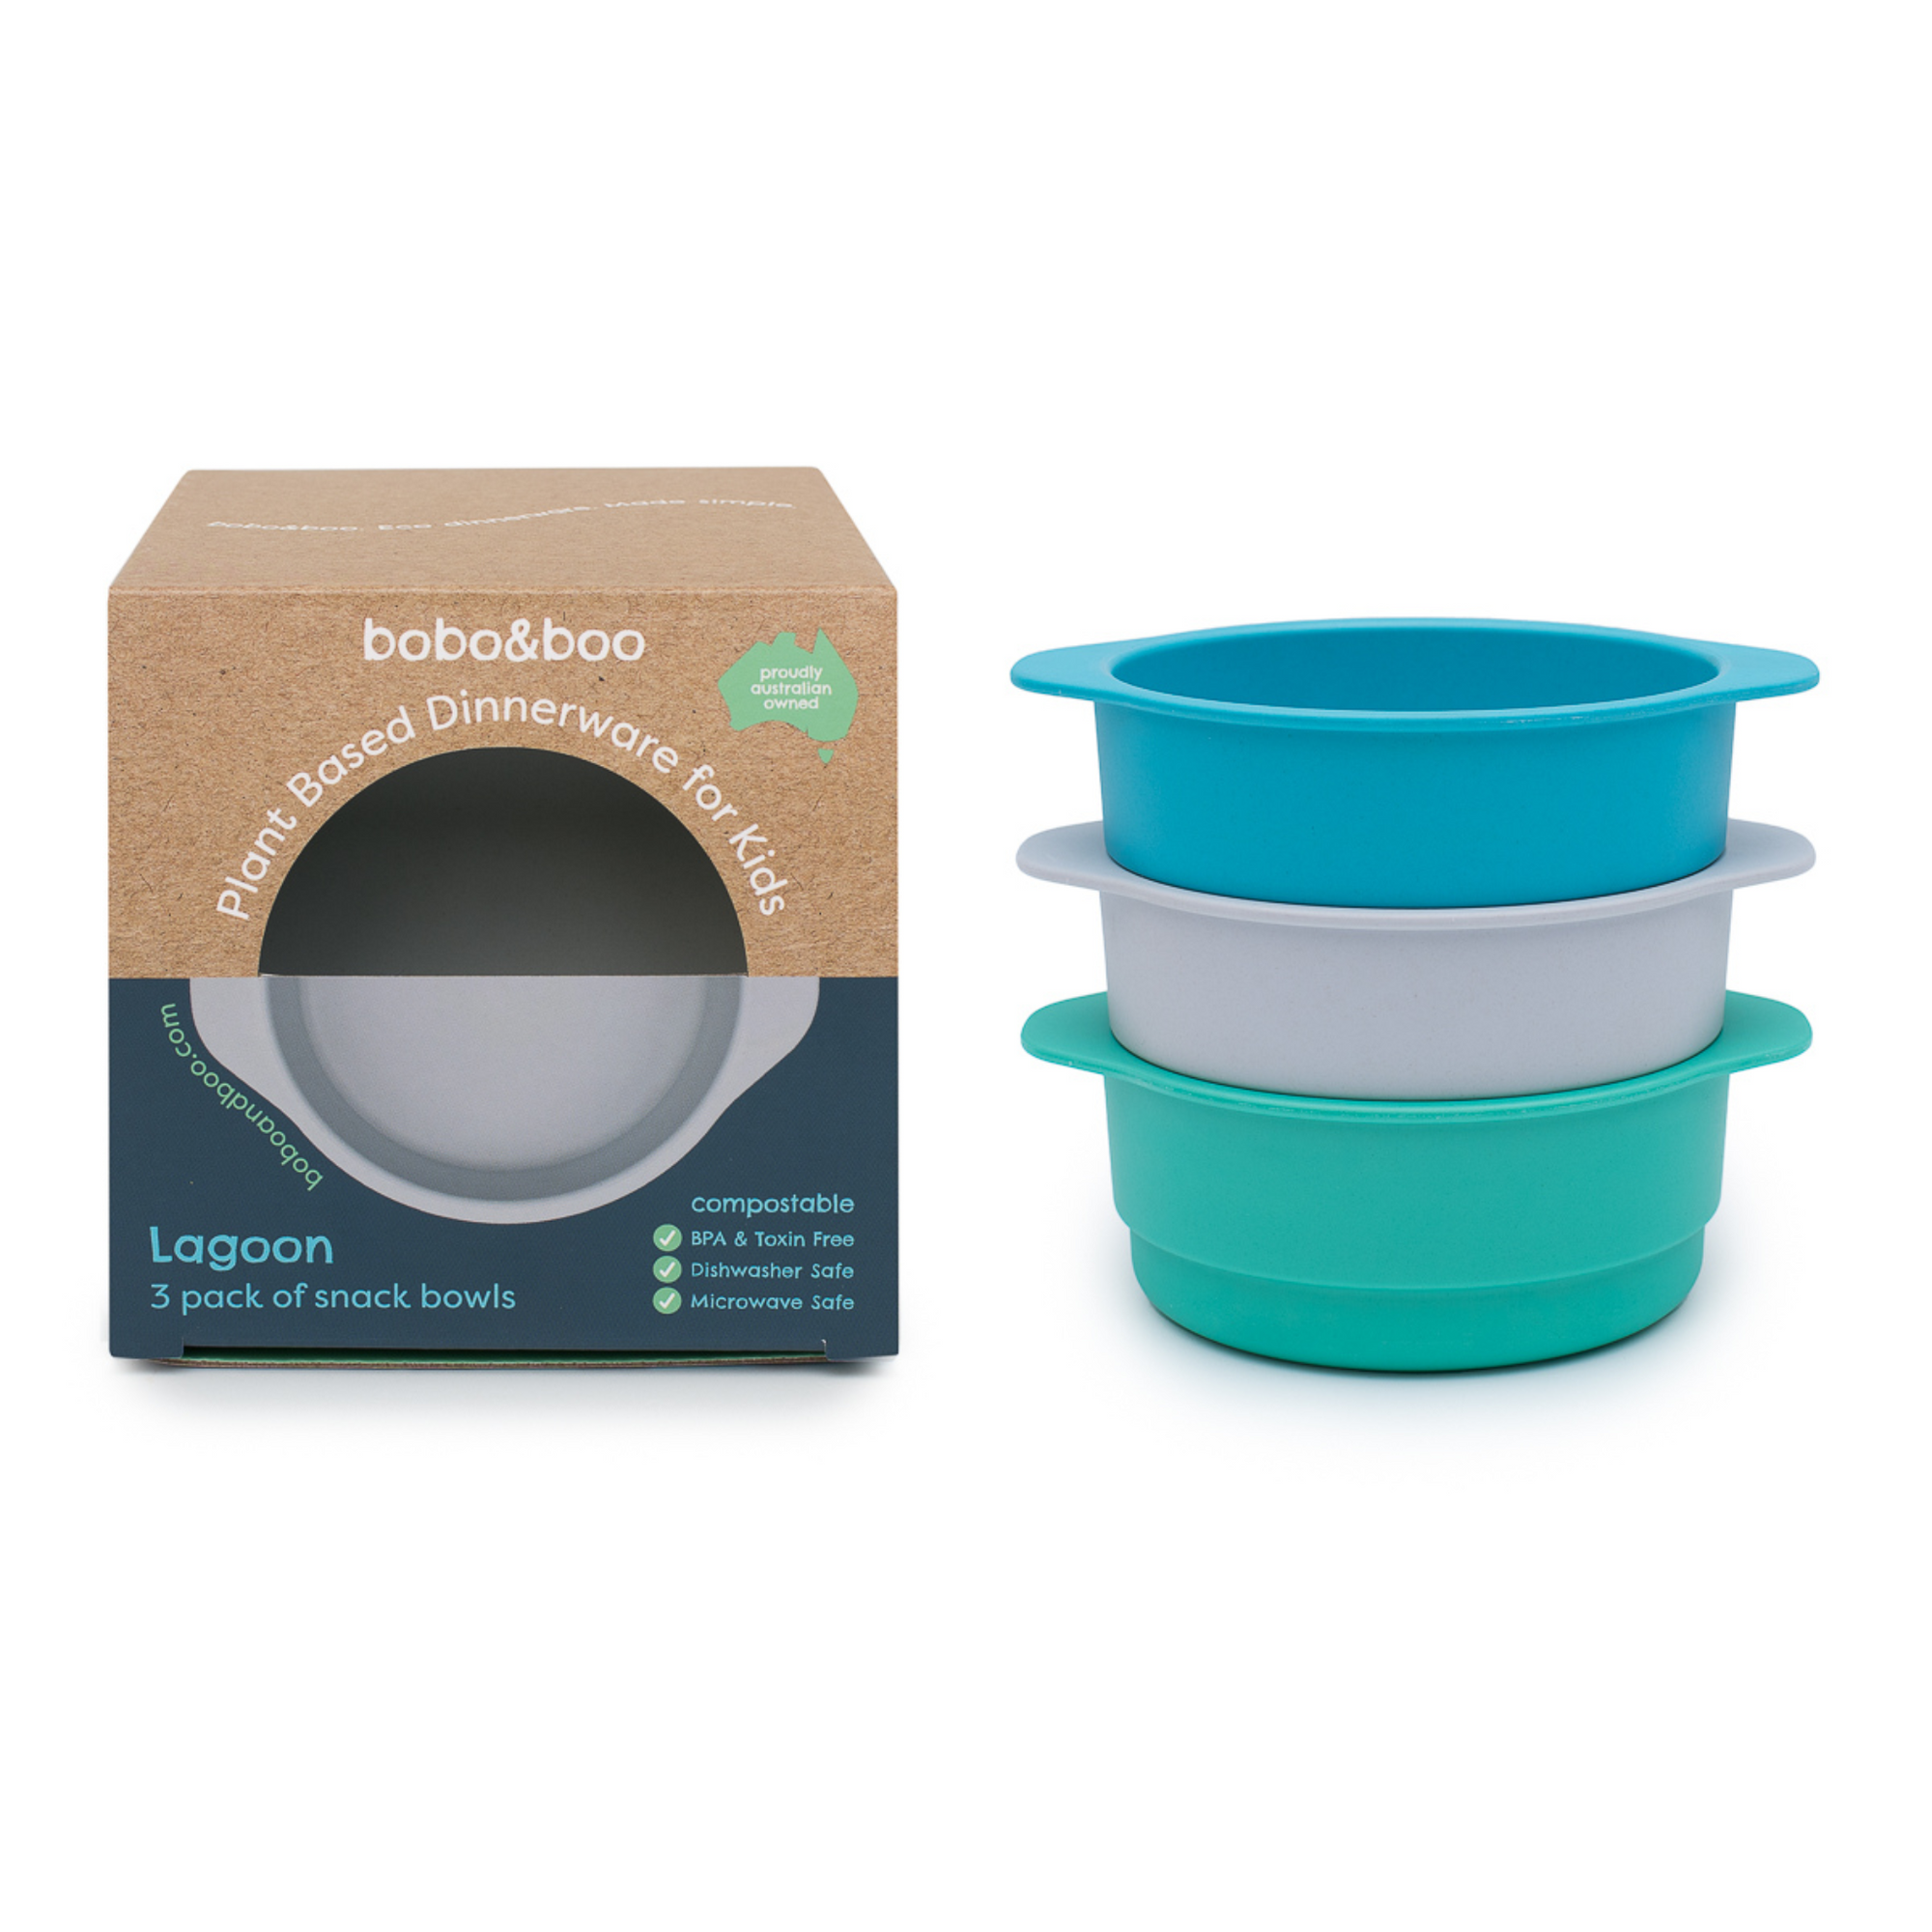 bobo&boo plant-based snack bowls stacked and sitting next to their bright gift box